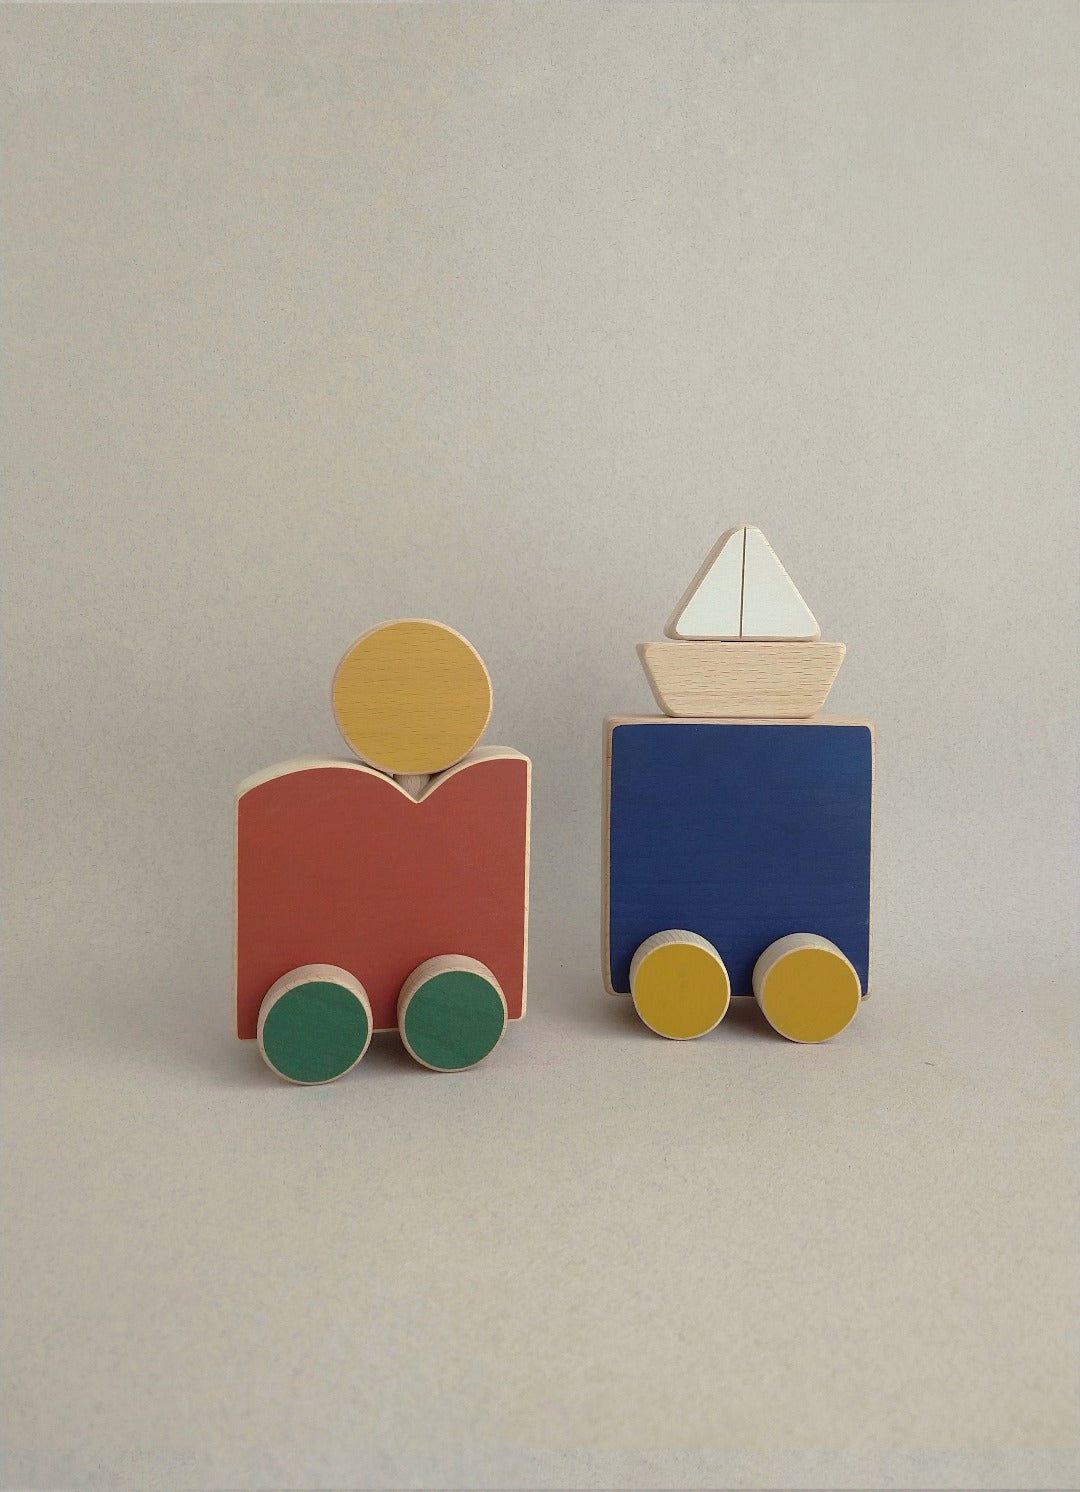 Wooden push toys for imaginative play. A kind of open-ended, unstructured play with no rules, goals or result- except that kids learn a lot along the way.